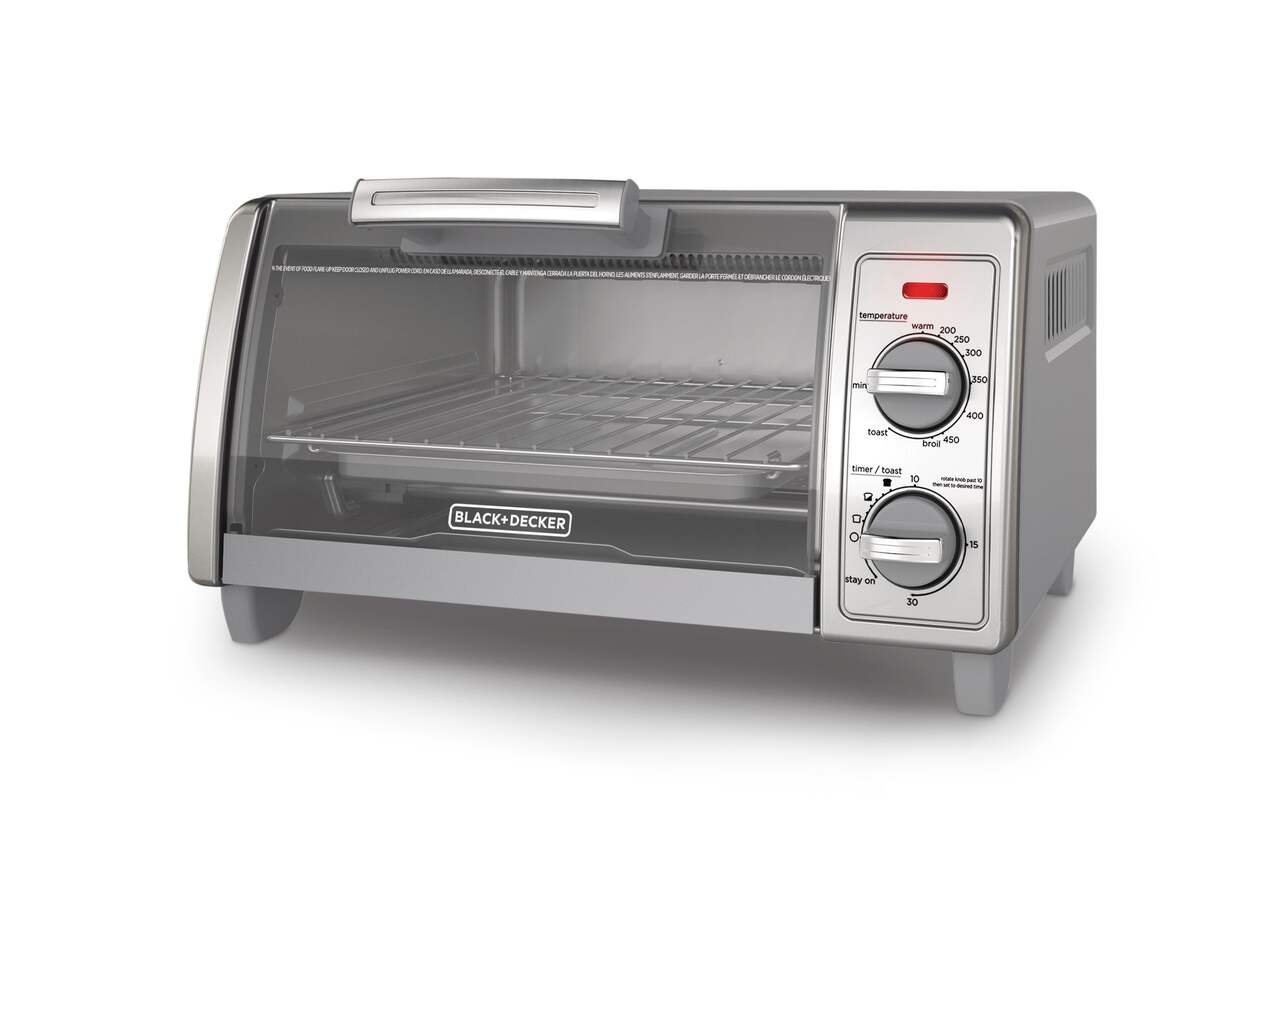 https://media-www.canadiantire.ca/product/living/kitchen/kitchen-appliances/0439561/black-and-decker-4-slice-toaster-oven-83fffbb6-c660-4b59-b924-2382a771fbef-jpgrendition.jpg?imdensity=1&imwidth=640&impolicy=mZoom